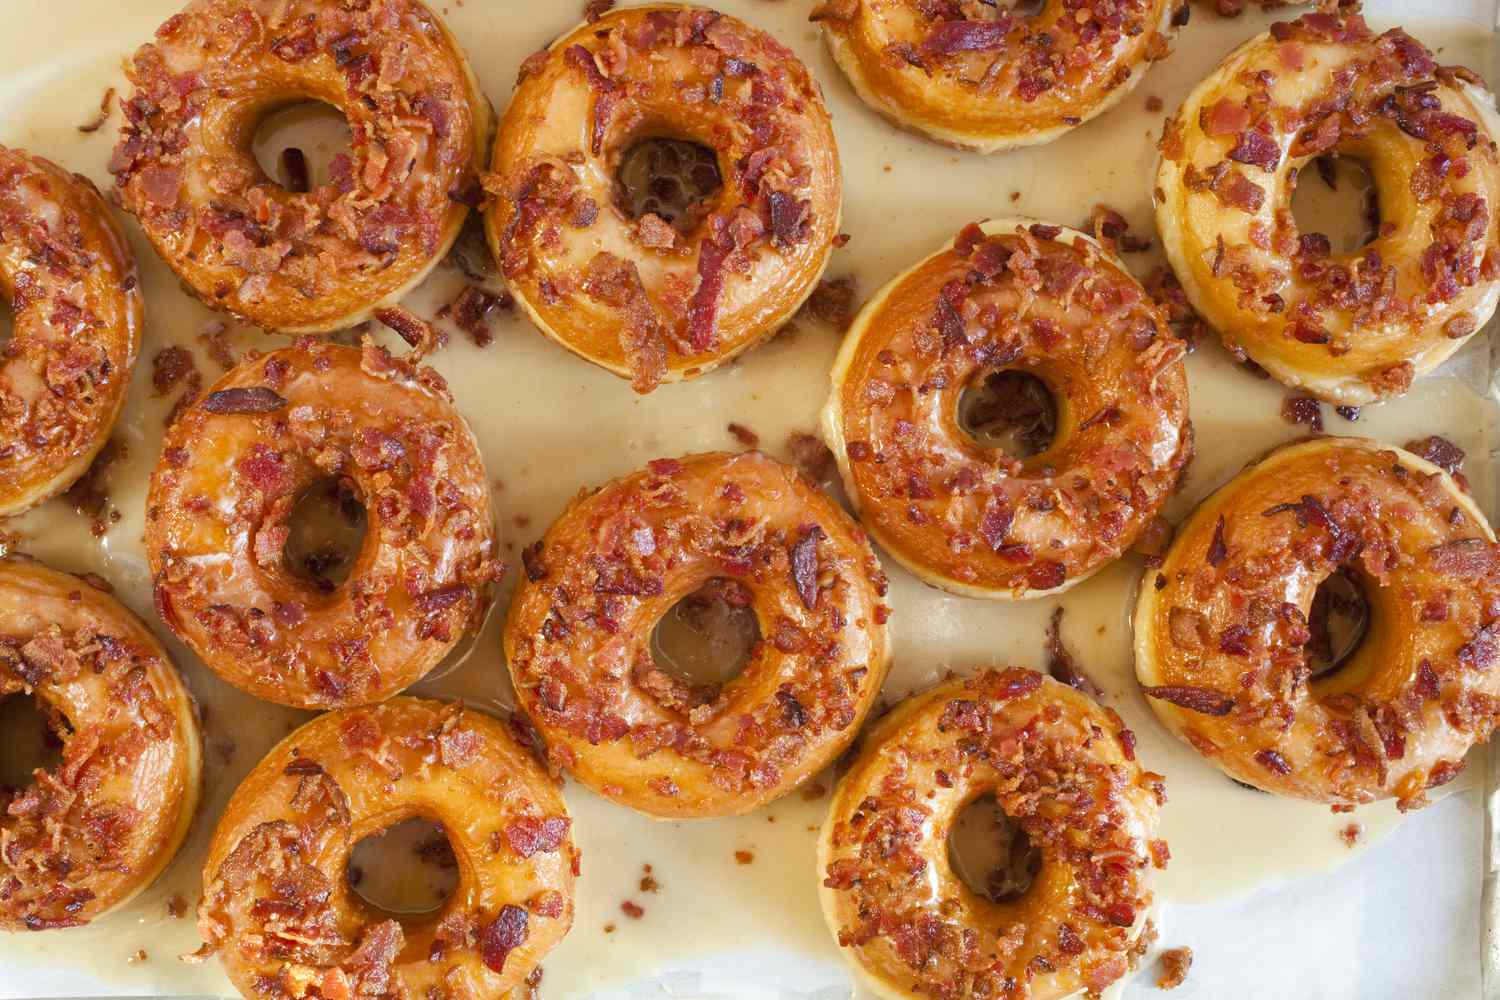 Maple glazed bacon donuts photographed from above